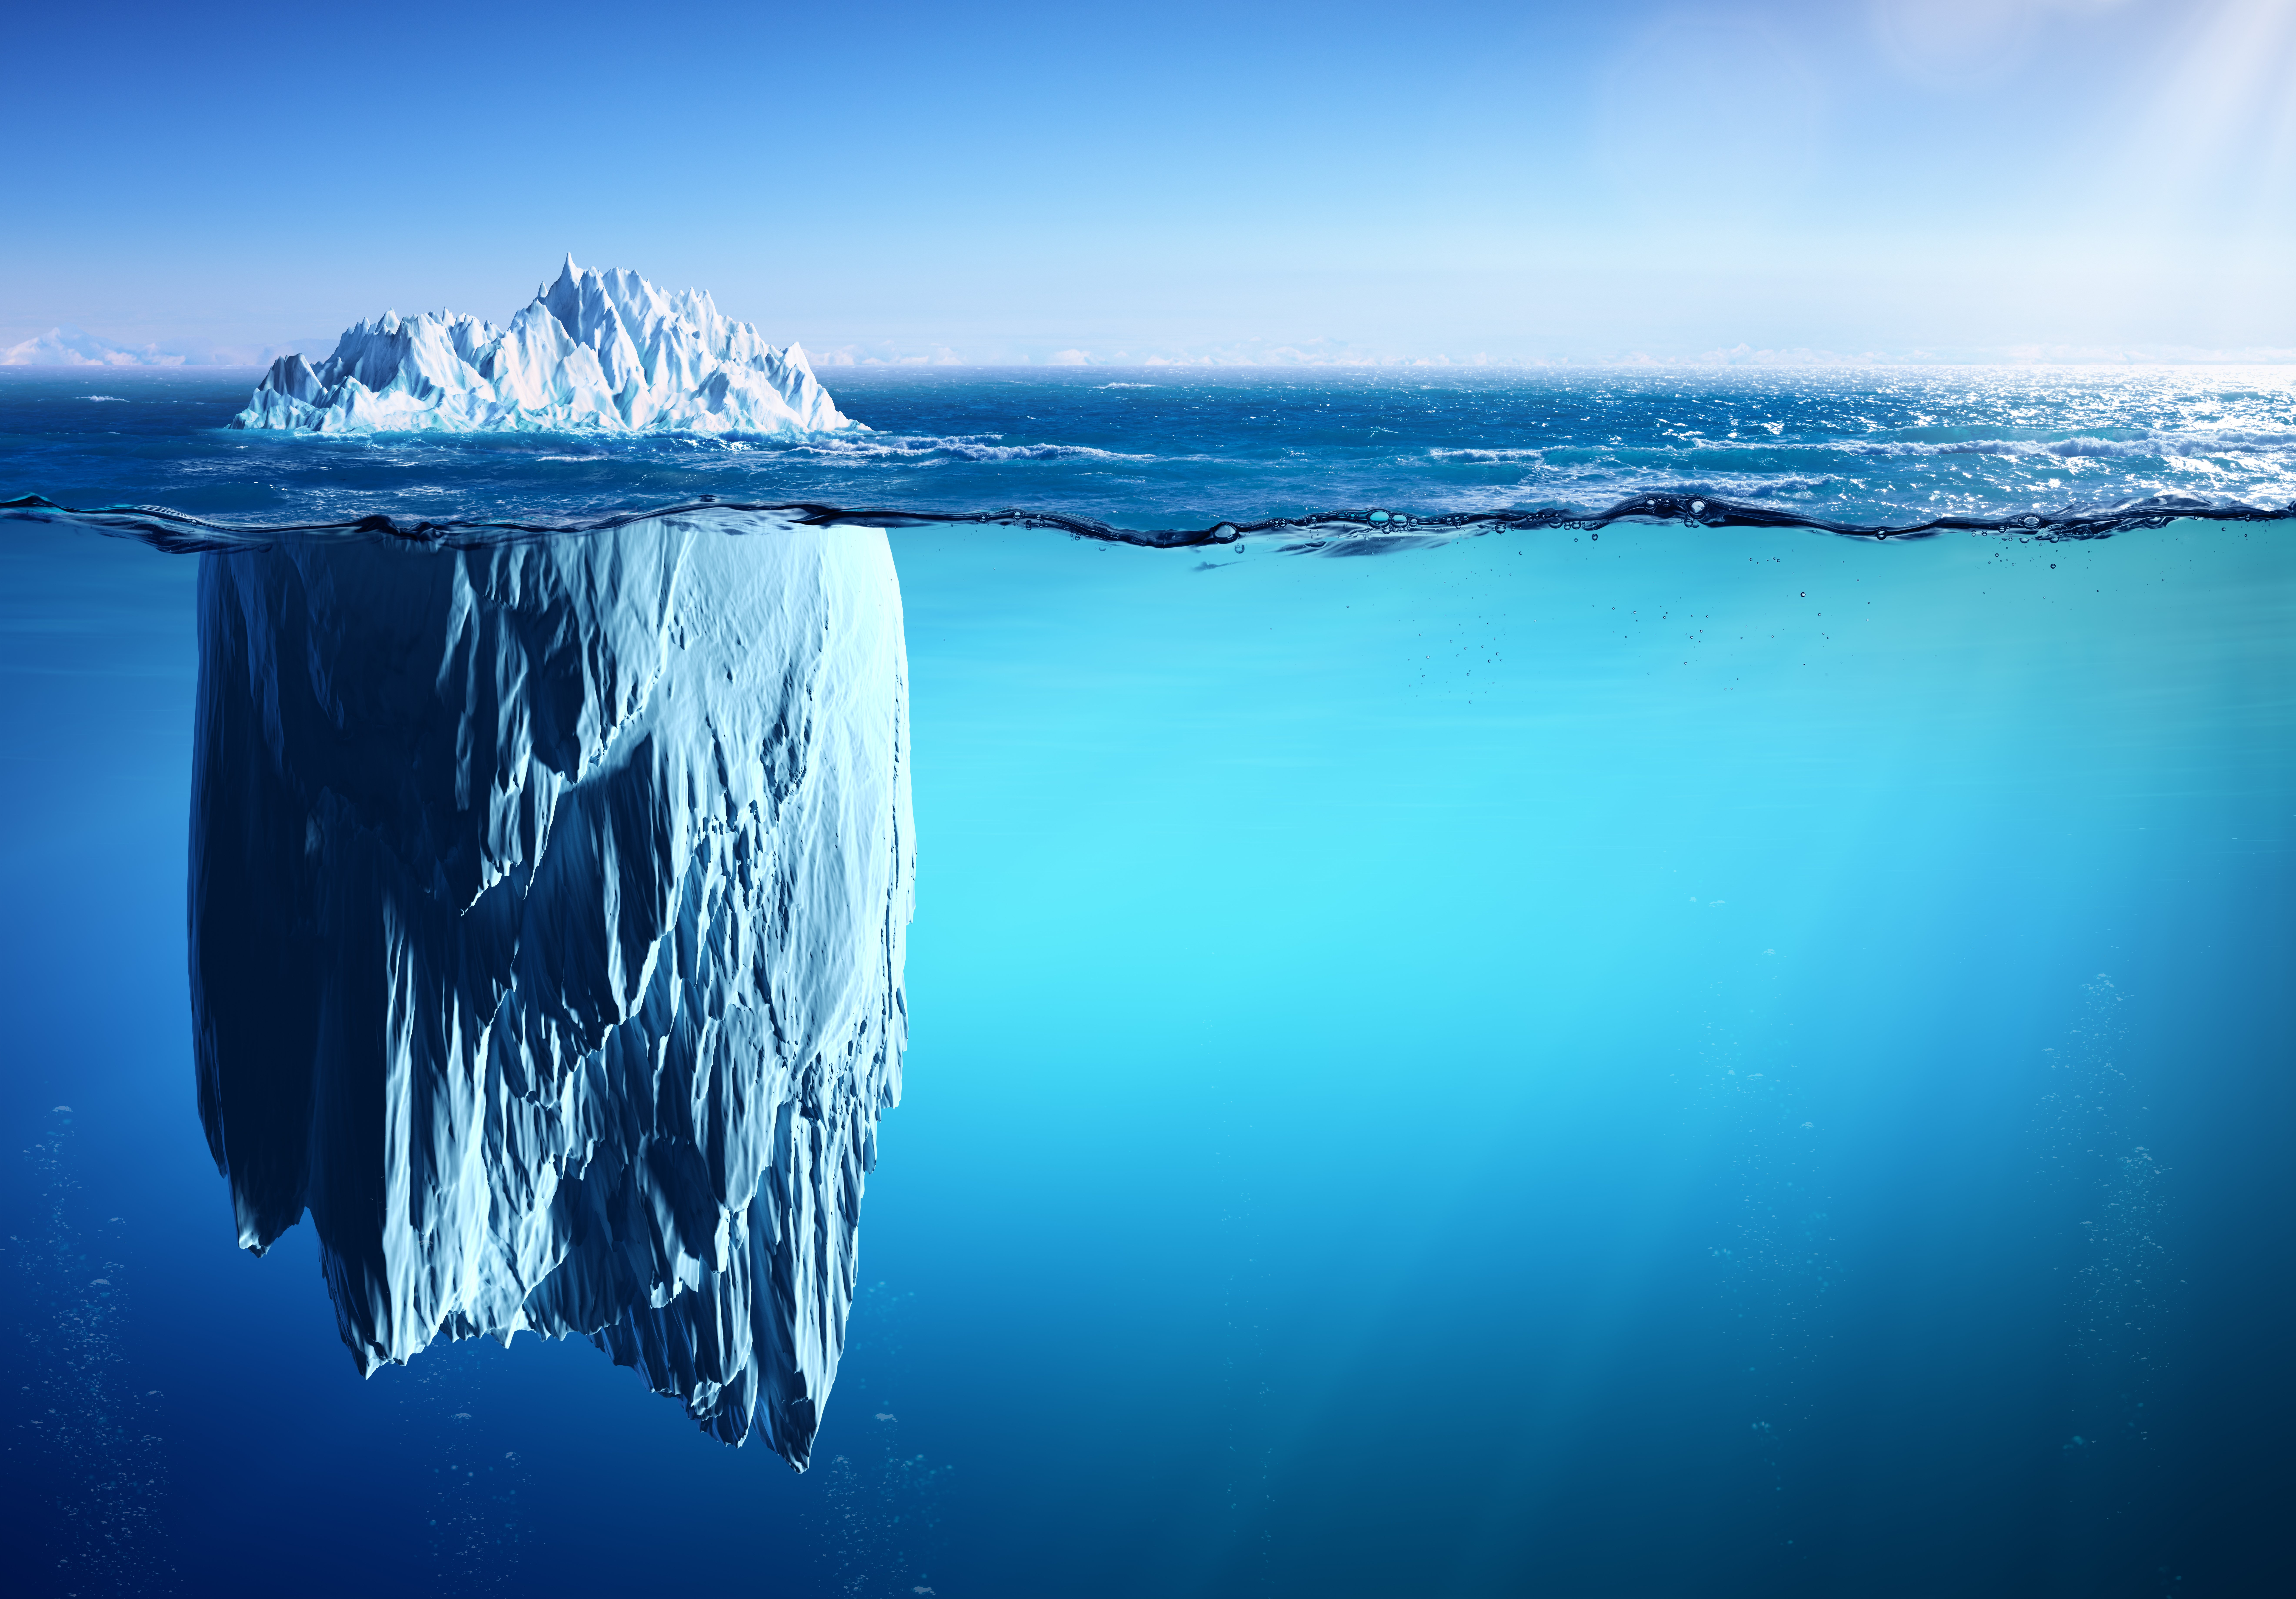 Illustration of an iceberg, above and below the water.